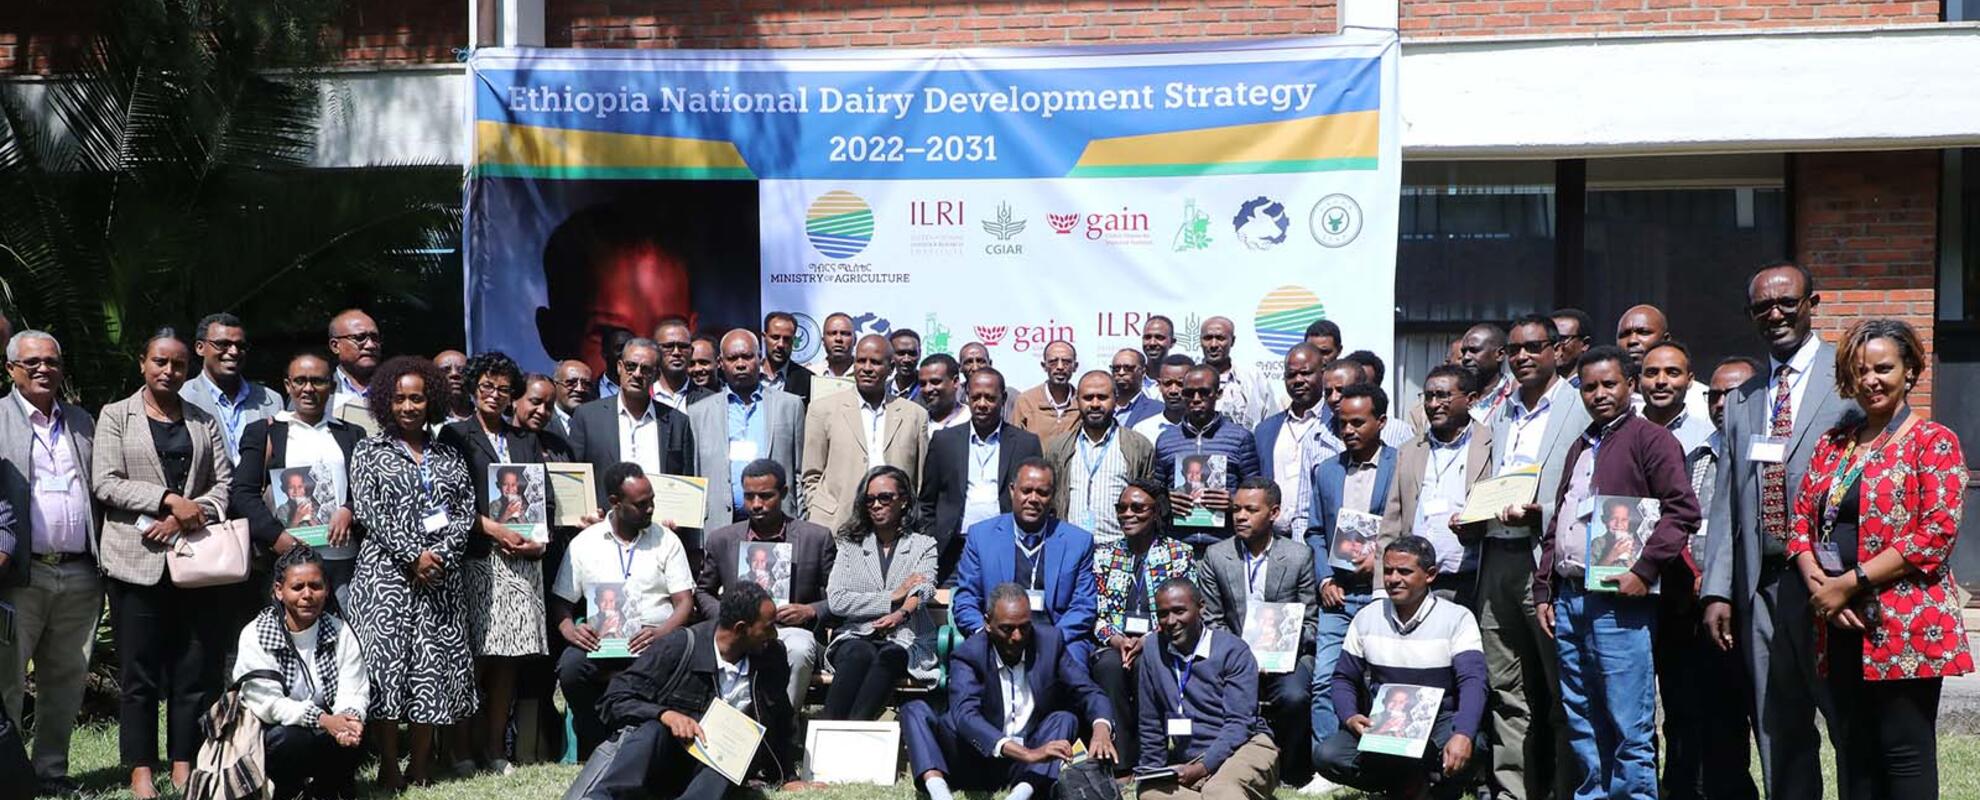 Launching of the Ethiopian national dairy development strategy, 2022–2031